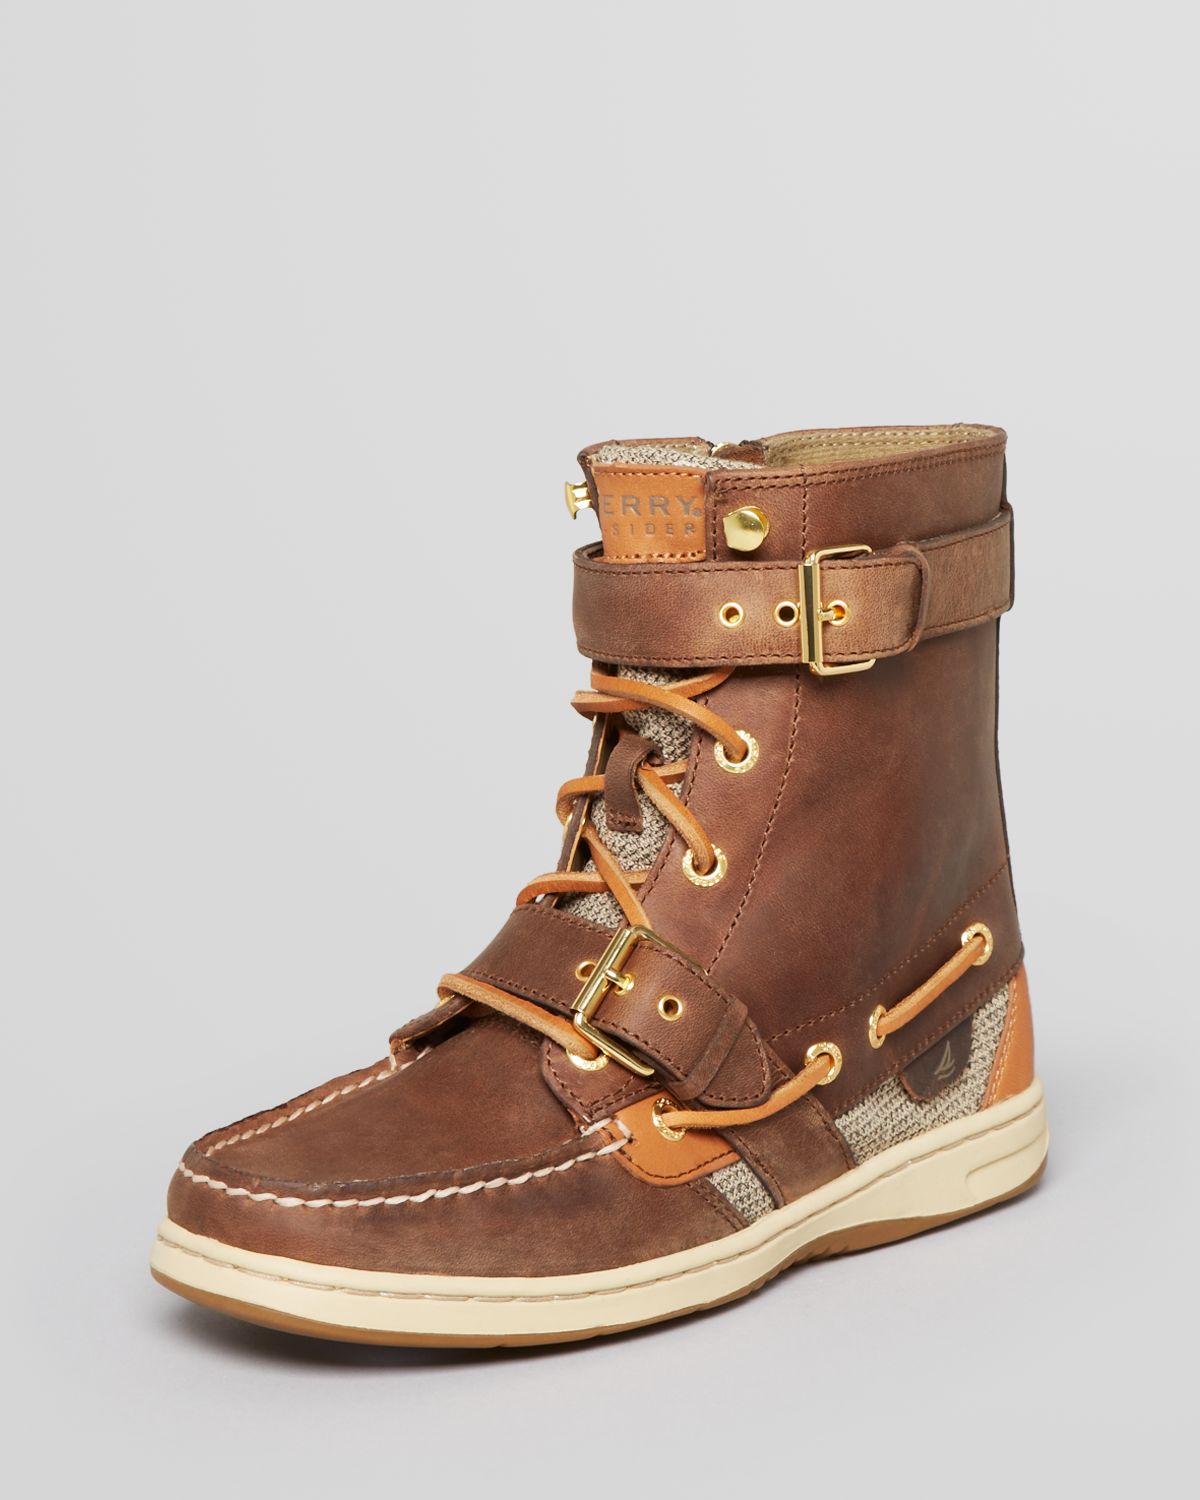 sperry lace up boots